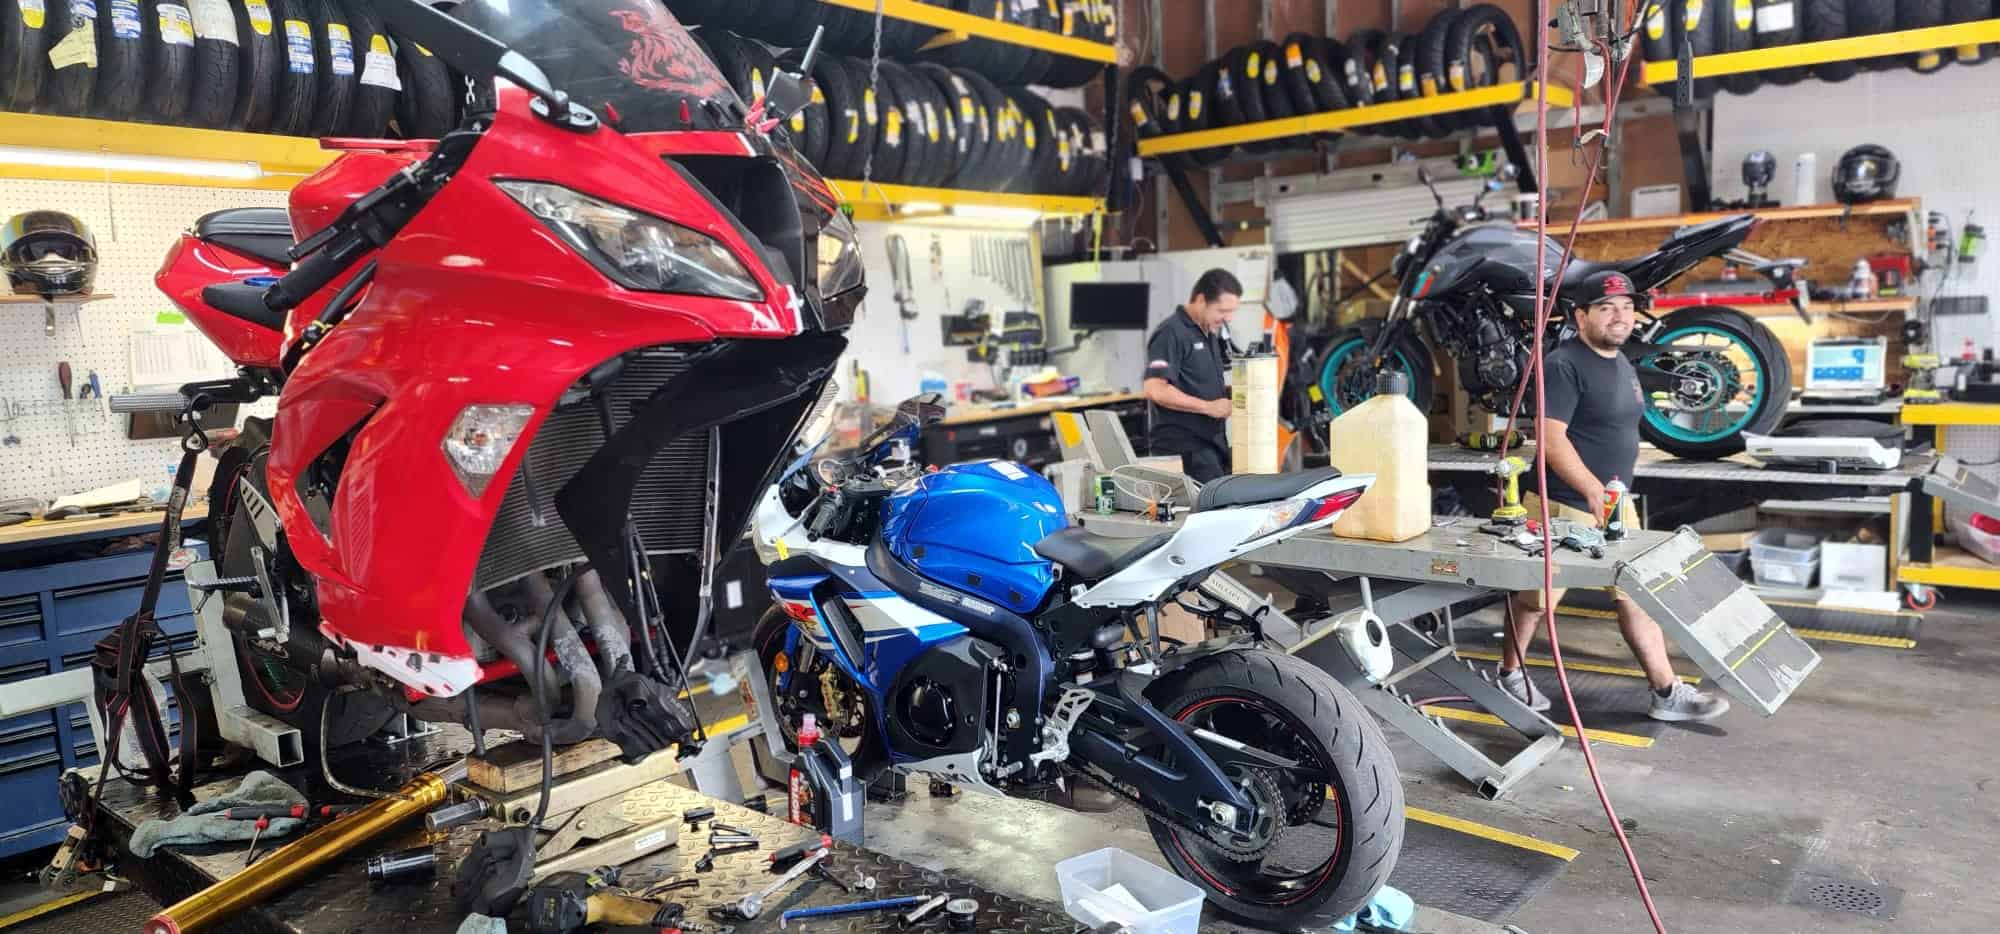 motorcycle maintenance being performed on a blue motorcycle.